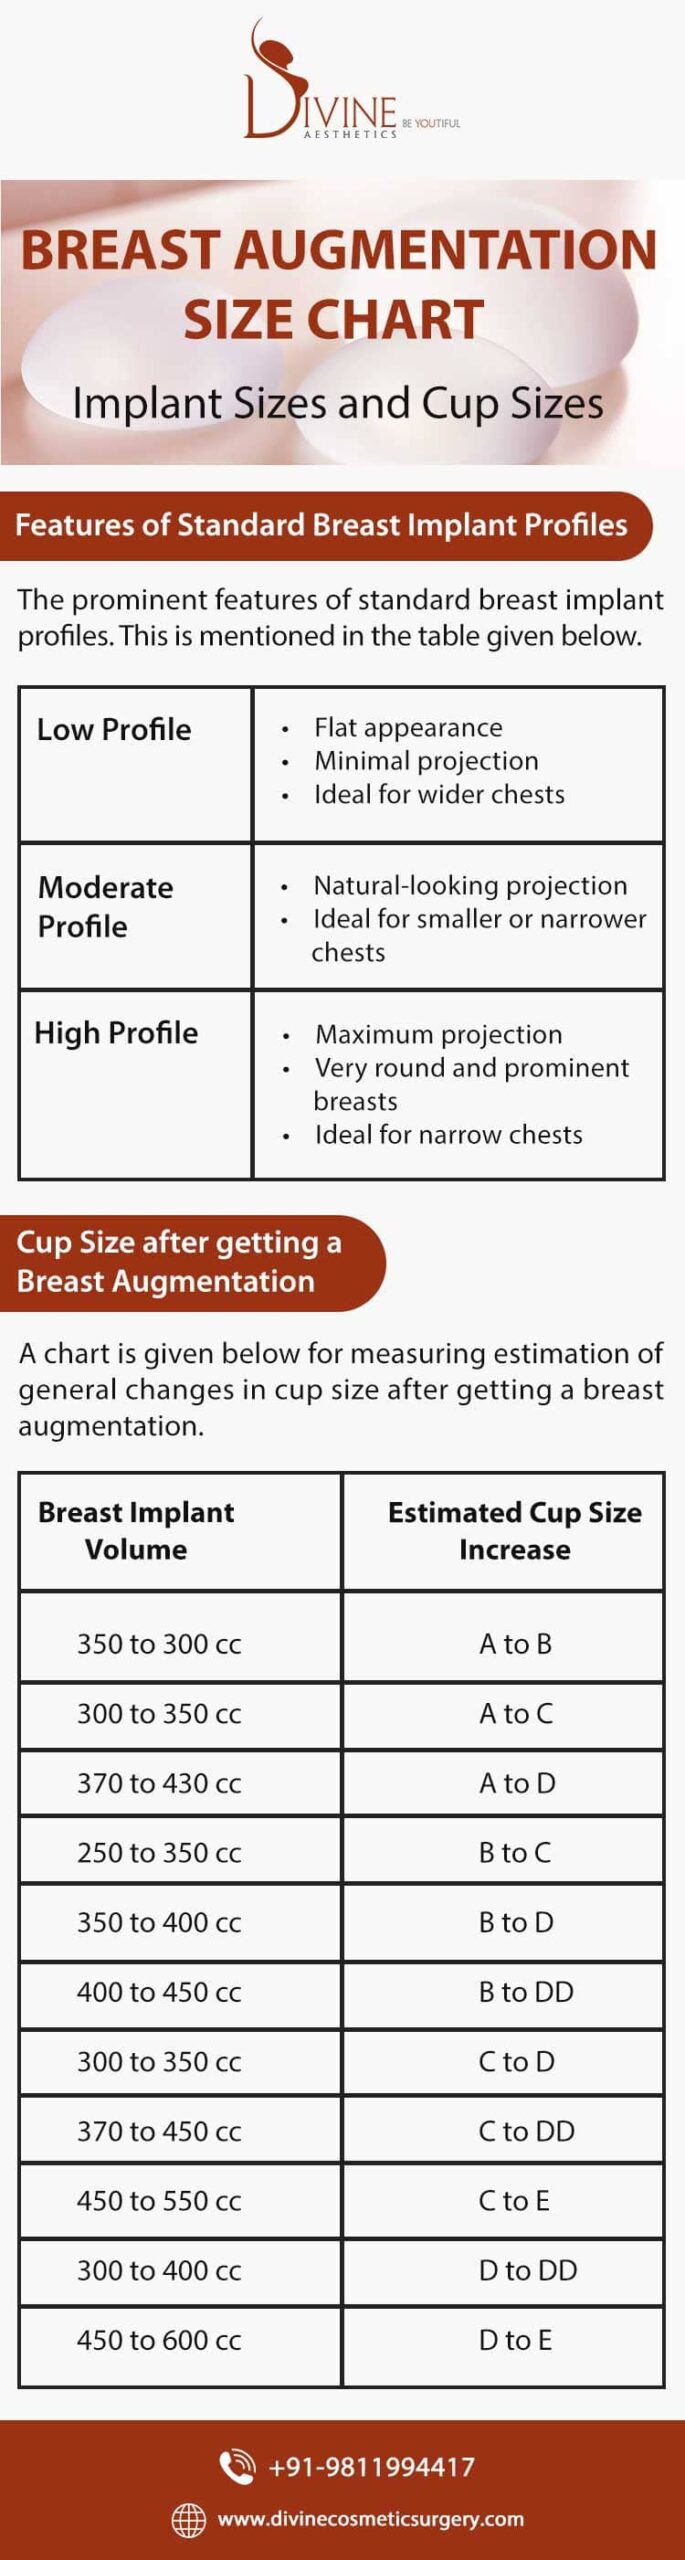 What Is The Smallest Breast Implant Size? - DrBfixin